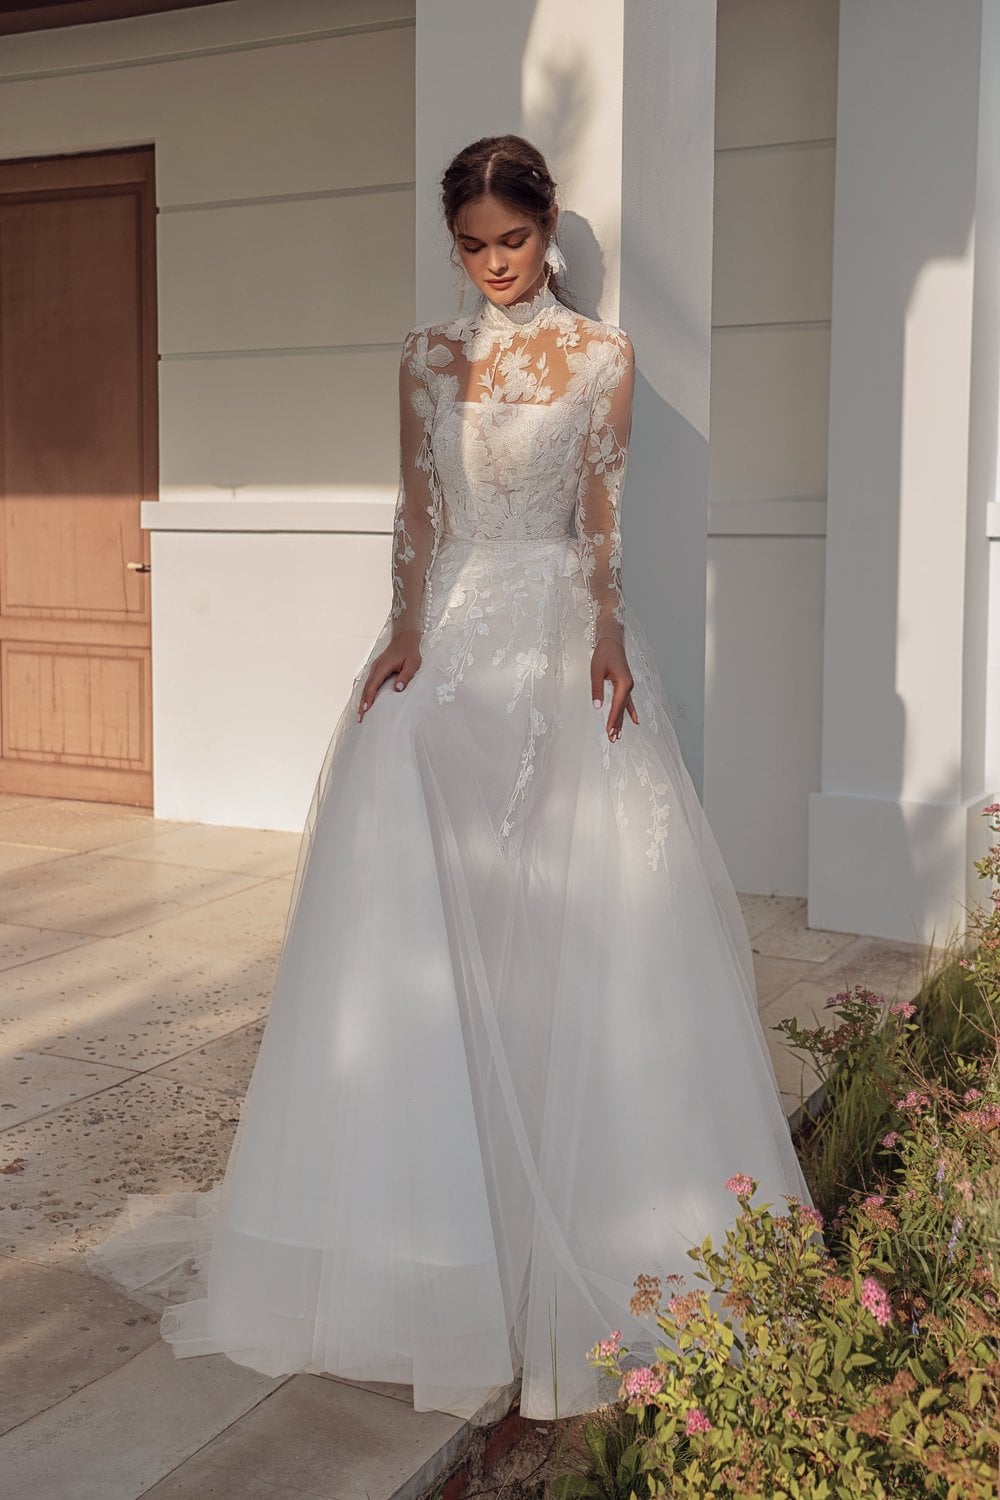 Modern Style Detachable Long Illusion Sleeves Lace Wedding Dress Bridal Gown Aline Floral Lace Sleeveless Strapless 3 Styles Transformer